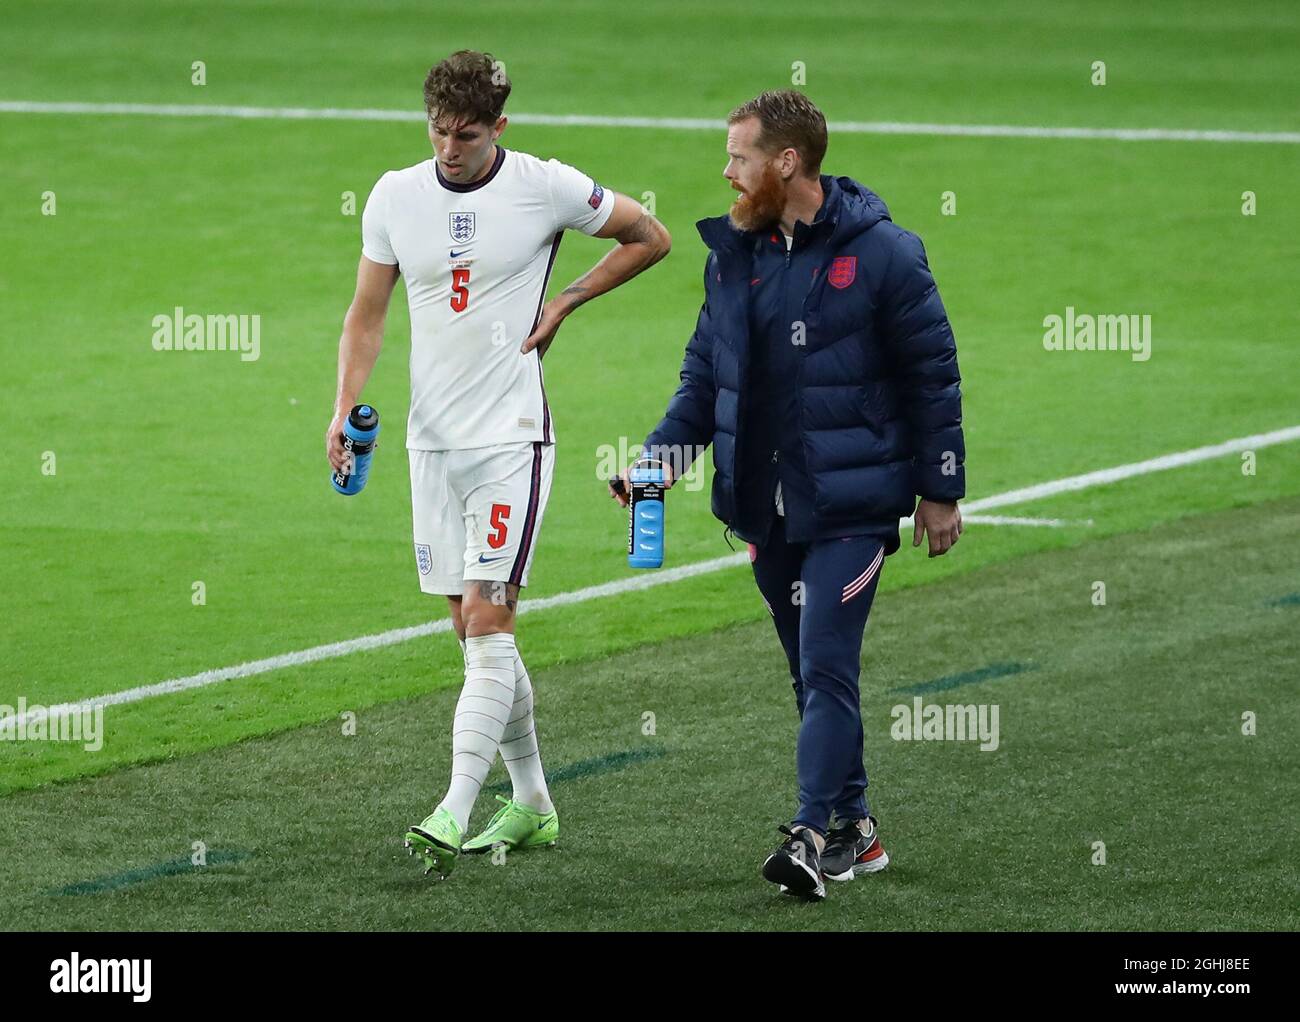 London, England, 22nd June 2021. John Stones of England leaves the game during the UEFA European Championships match at Wembley Stadium, London. Picture credit should read: David Klein / Sportimage via PA Images Stock Photo